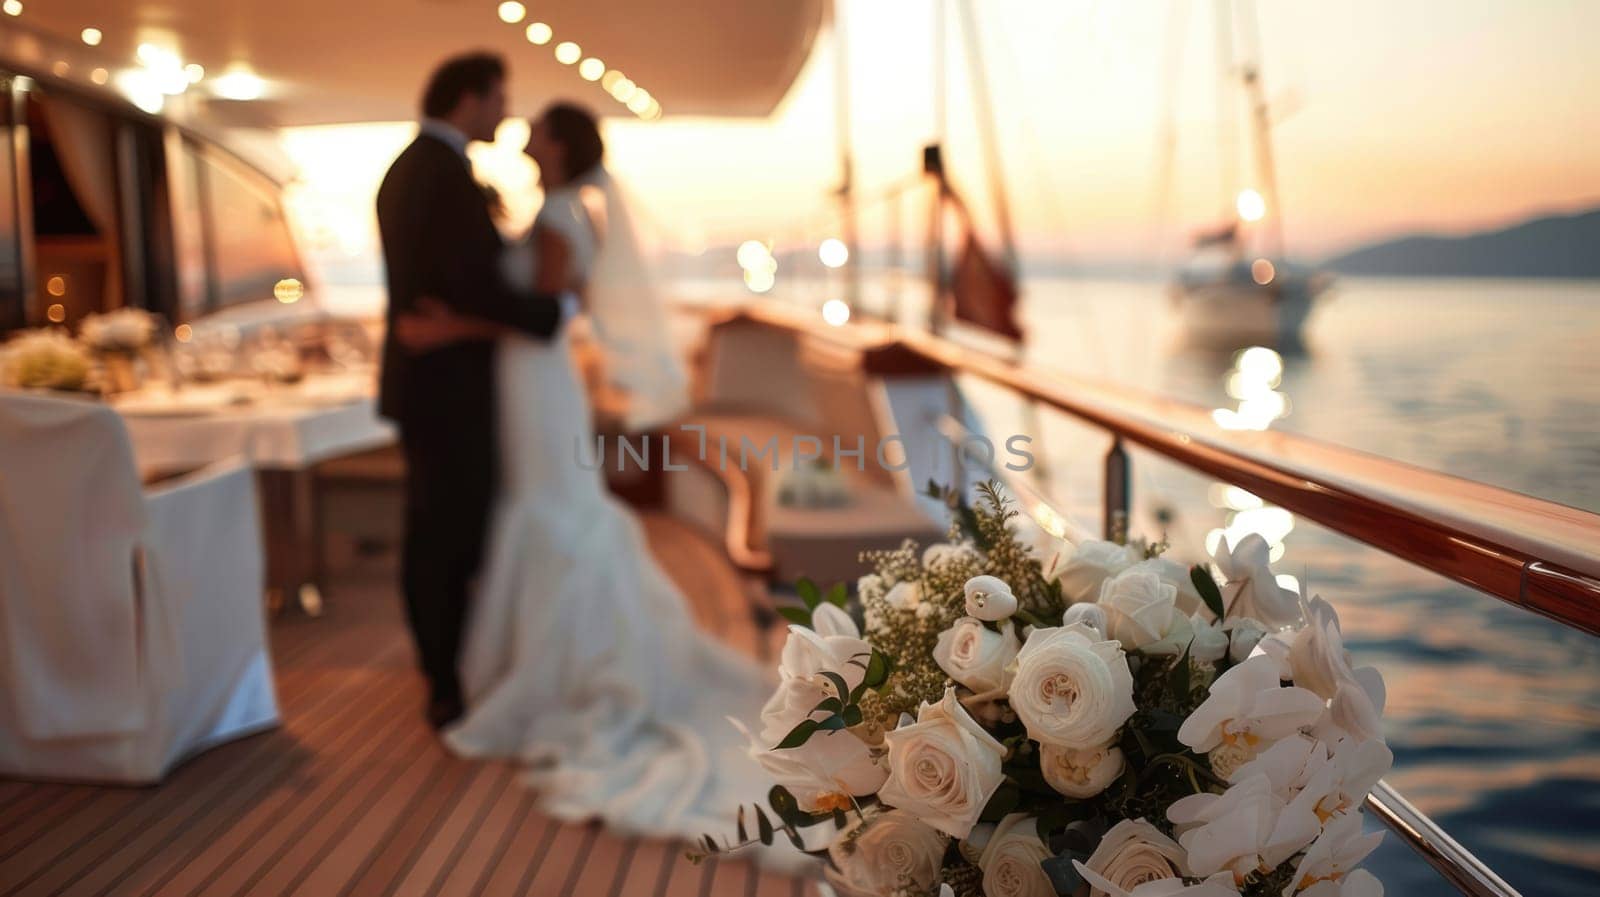 Wedding on a yacht. Wedding decor and bouquet in the foreground. Blurred background AI